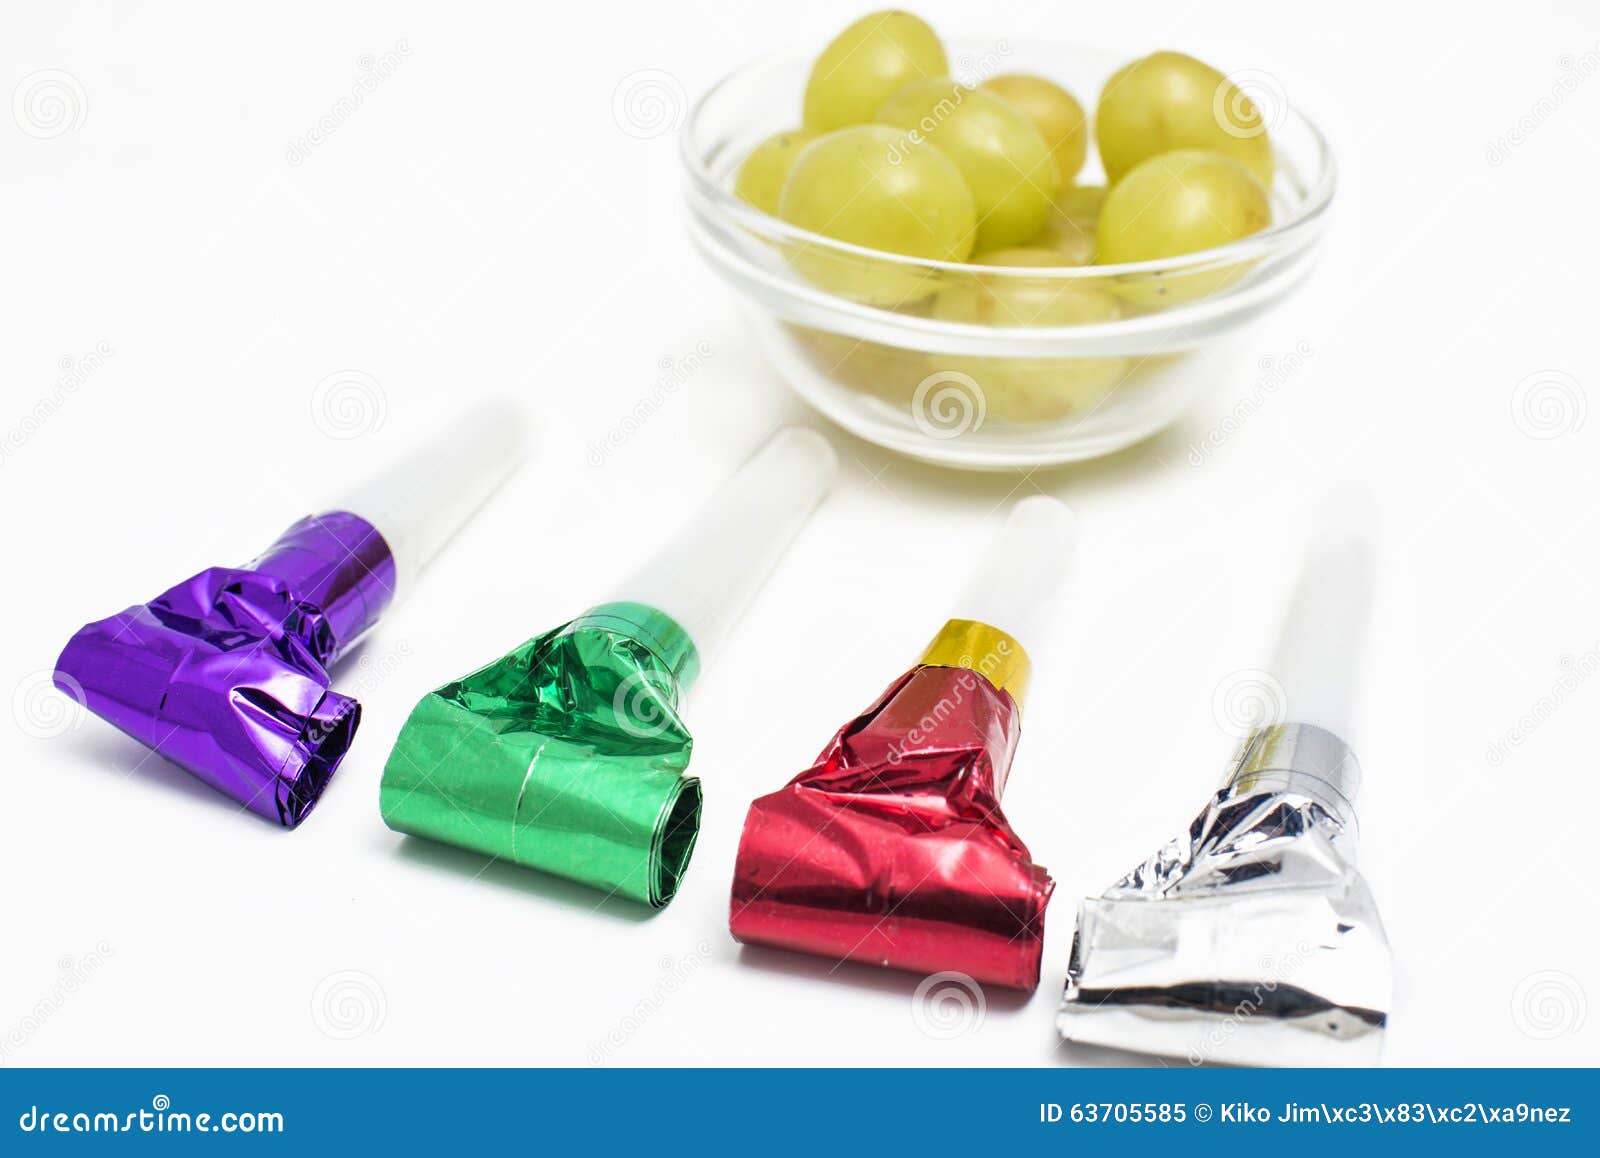 twelve grapes and utensils for new year's